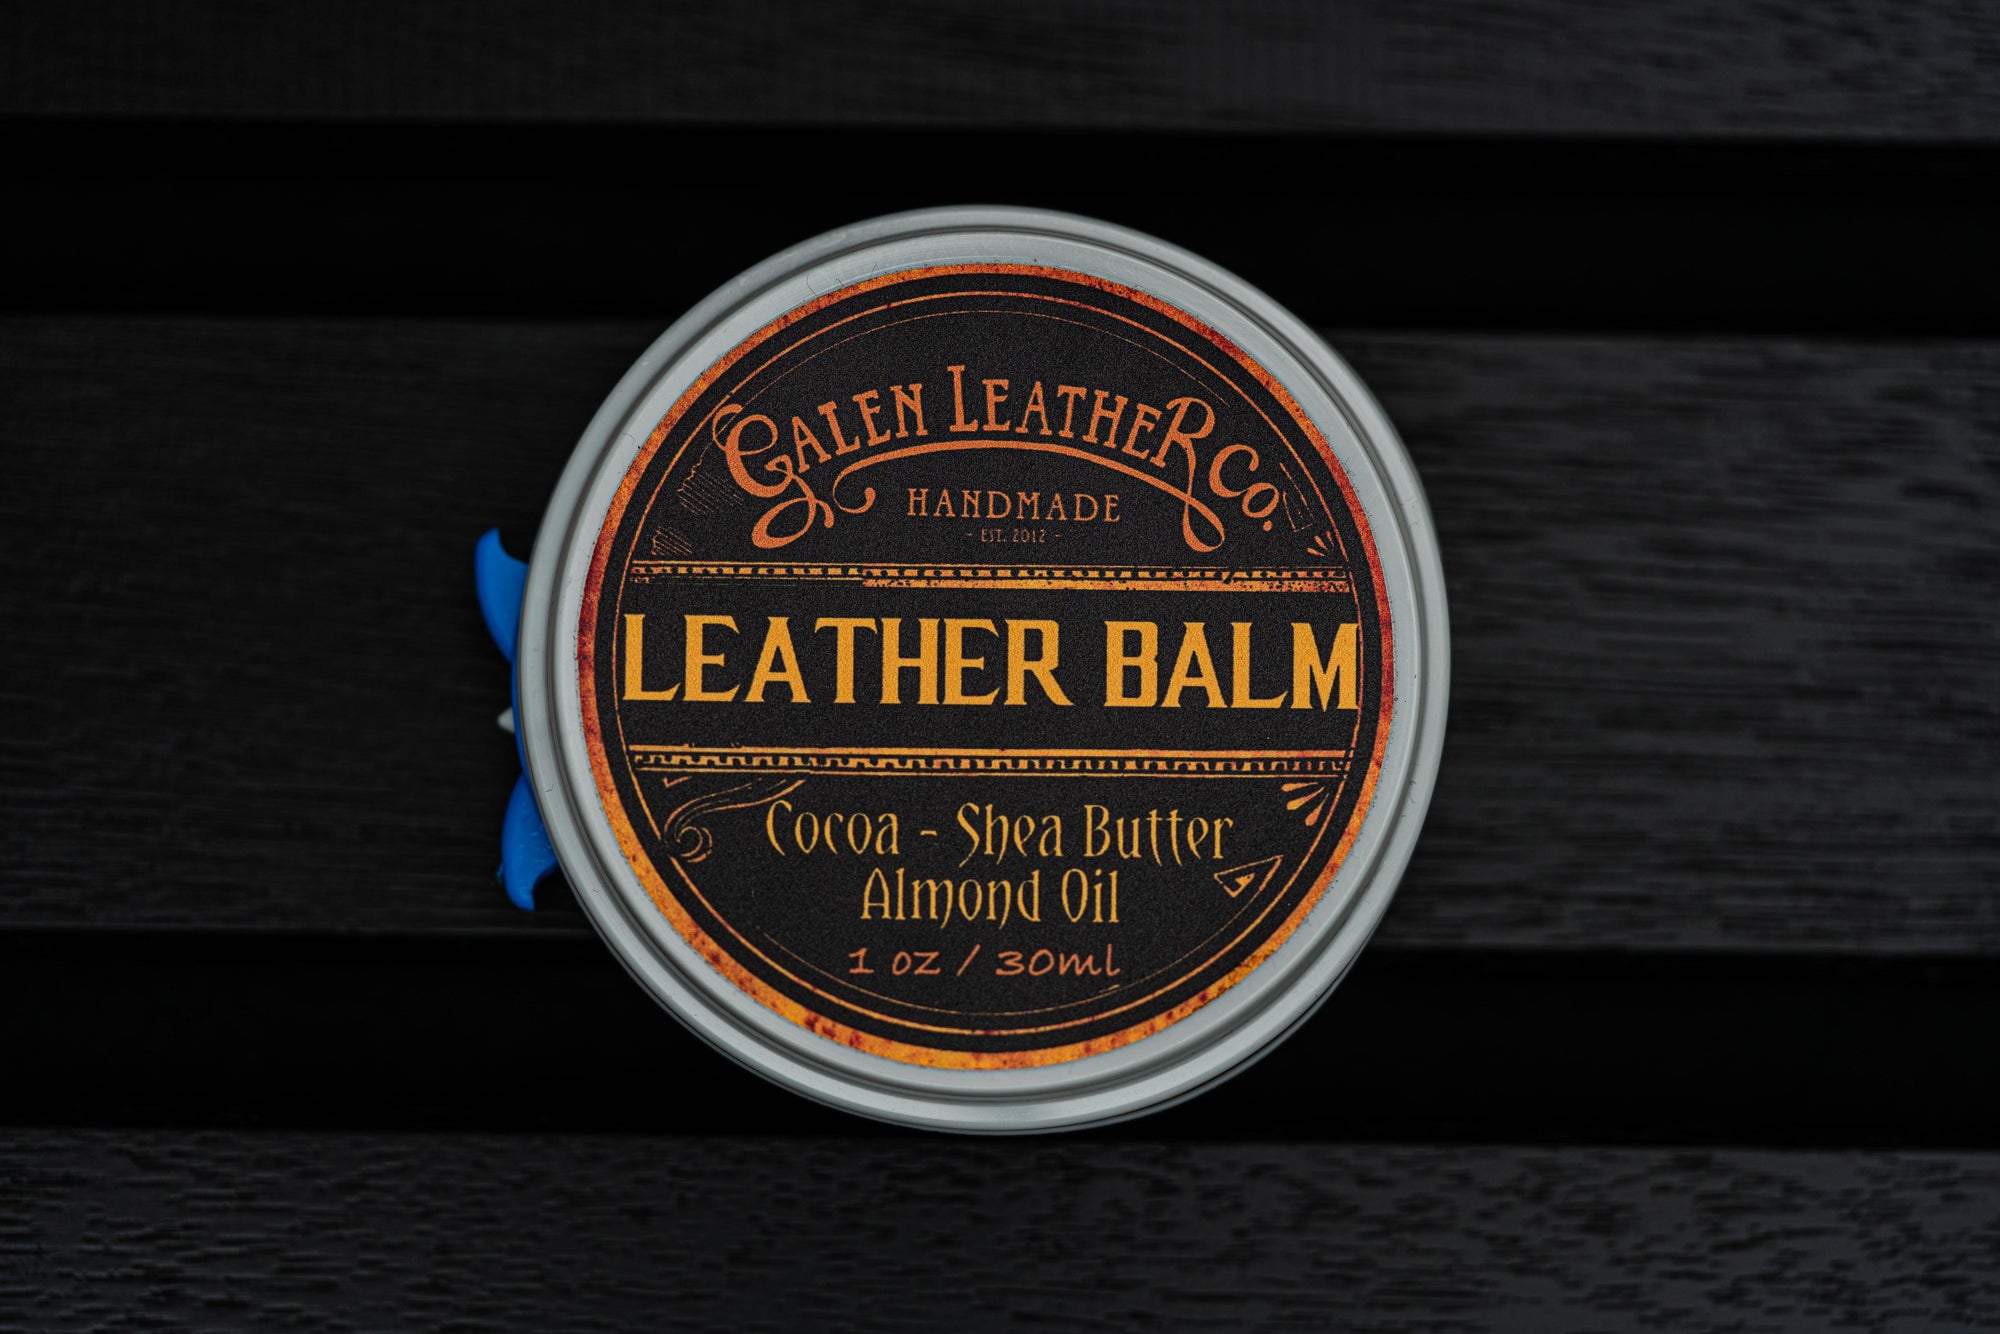 Leather Balm All Natural - Galen Leather